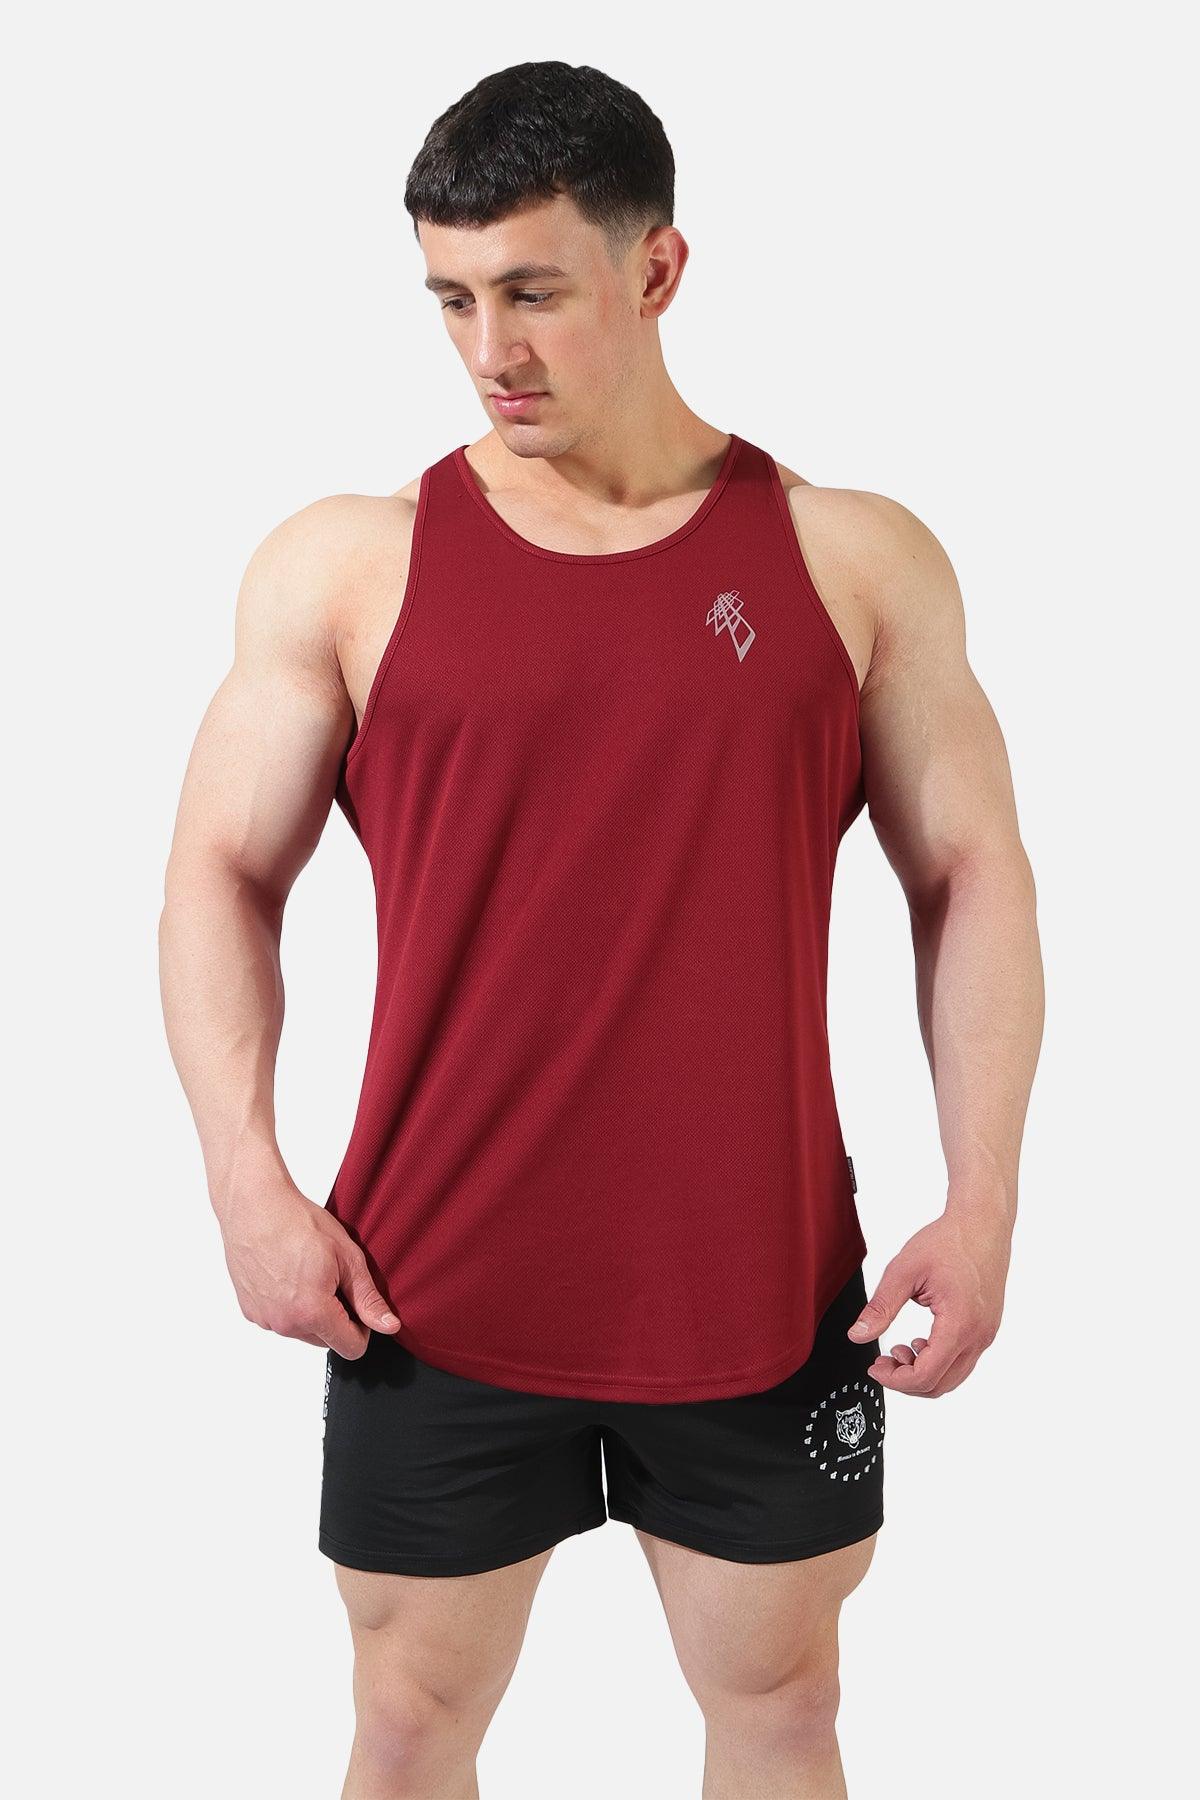 Workout Tank Tops for Men | Bodybuilding & Fitness Gym Wear| Jed North M / Red